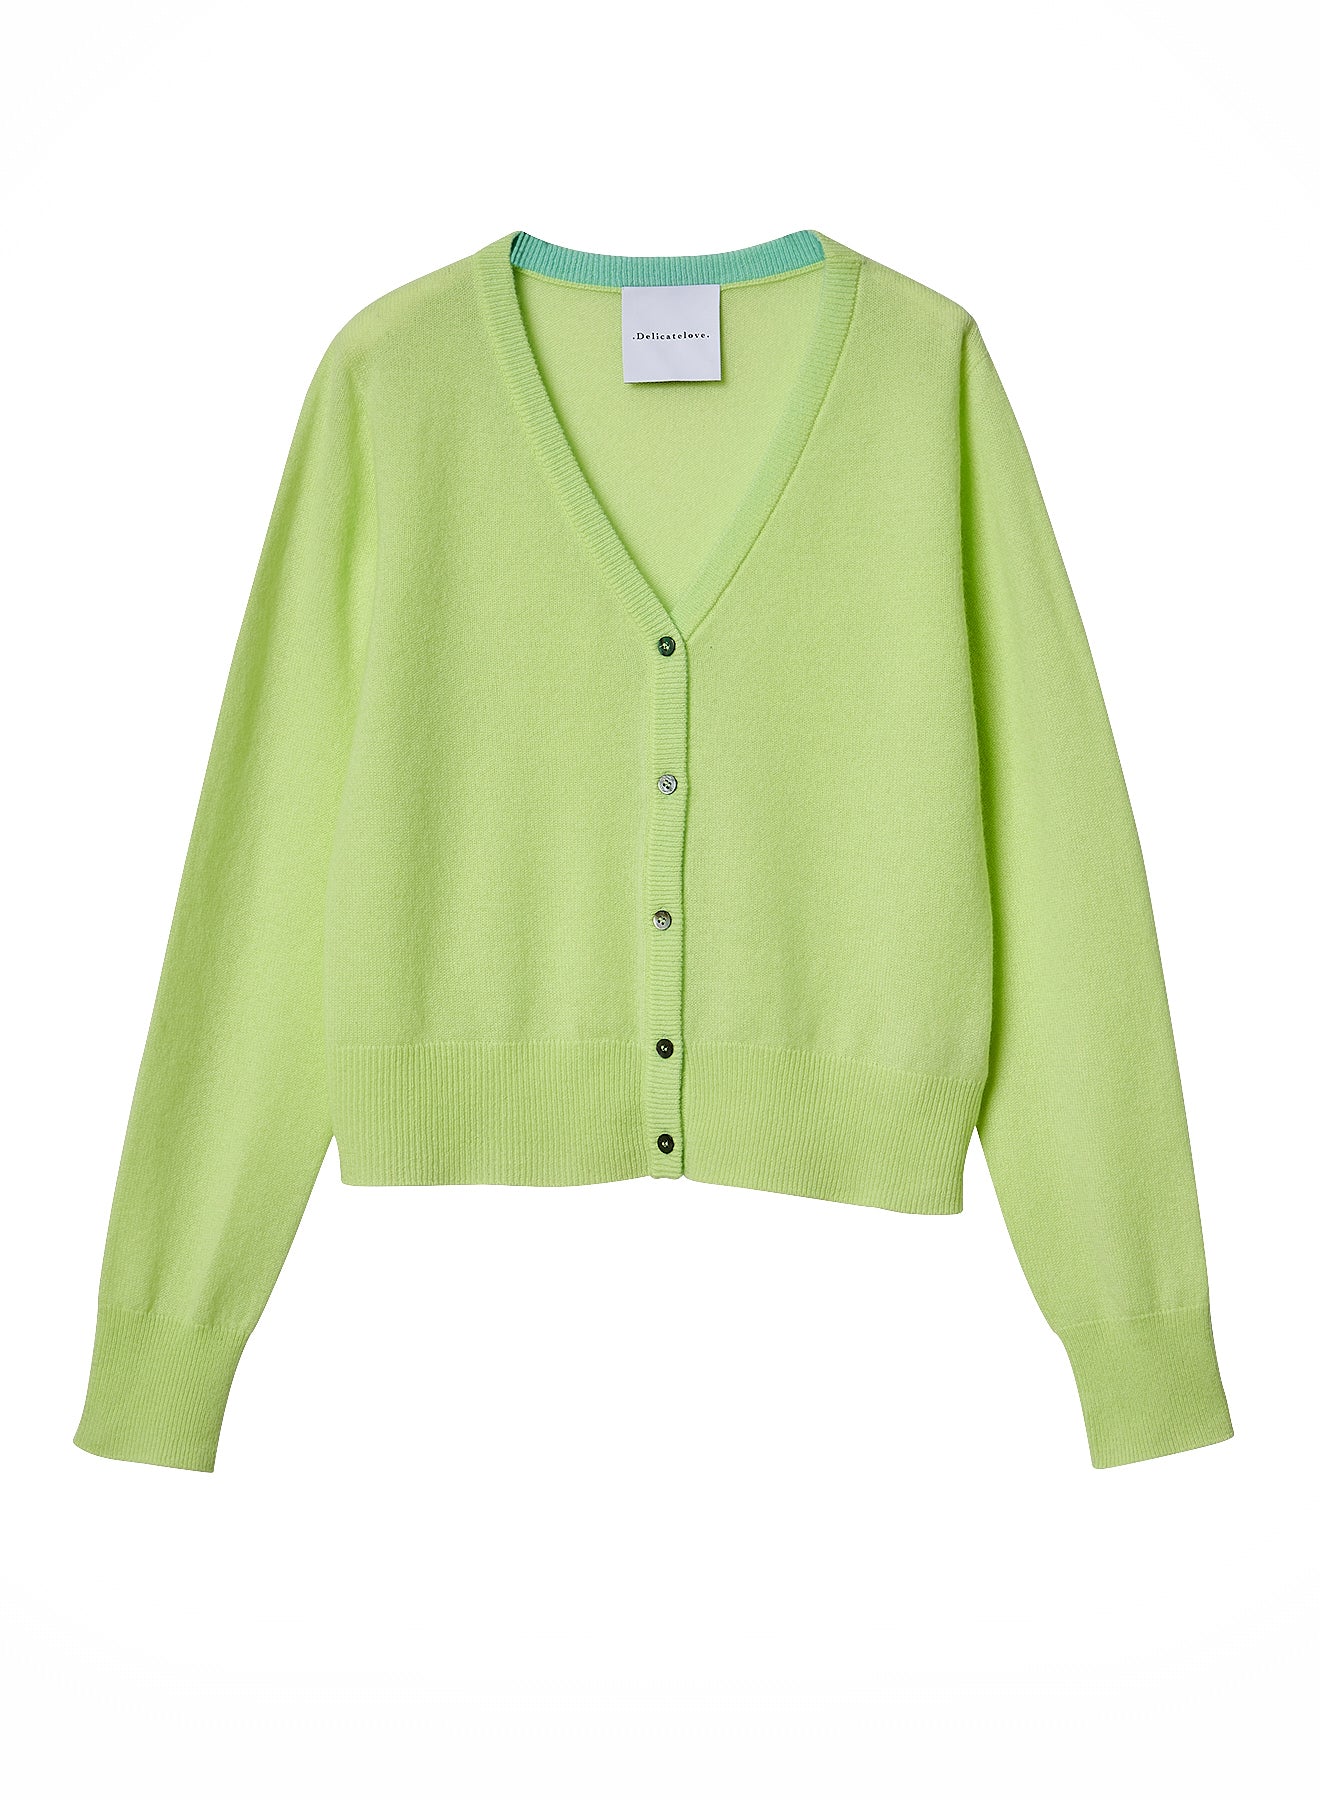 delicate-love-young-pea-marnie-cashmere-cardigan